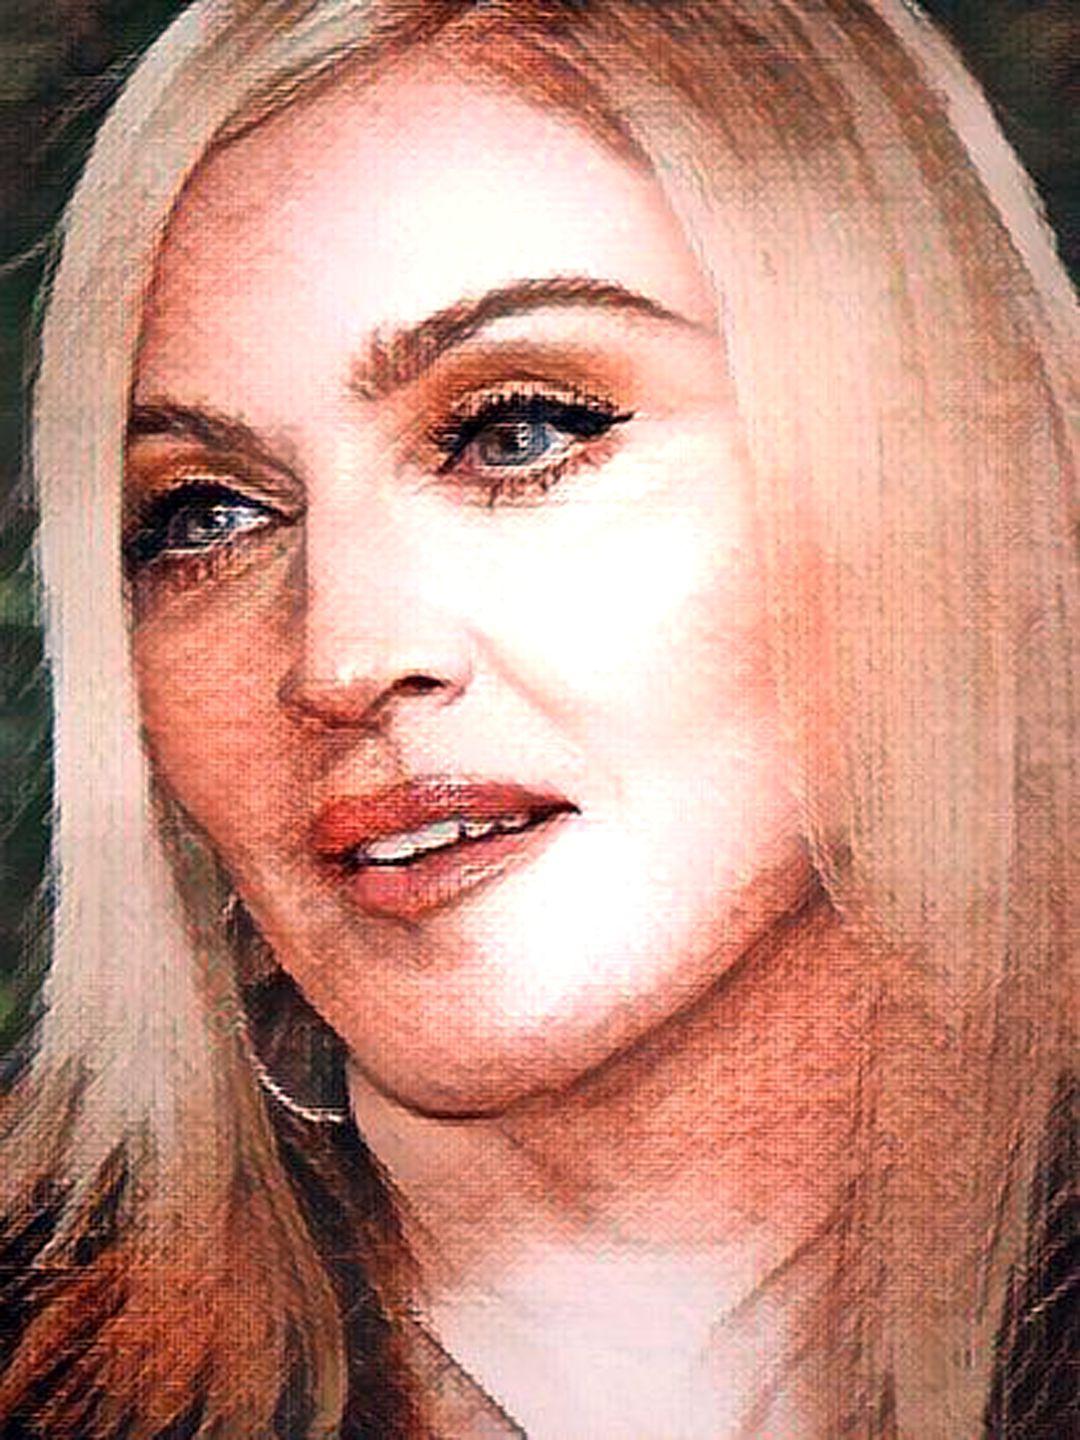 All Porn Star Hd Sex Lili Luxe - Madonna # 36 - Celeb ART - Beautiful Artworks of Celebrities, Footballers,  Politicians and Famous People in World | OpenSea